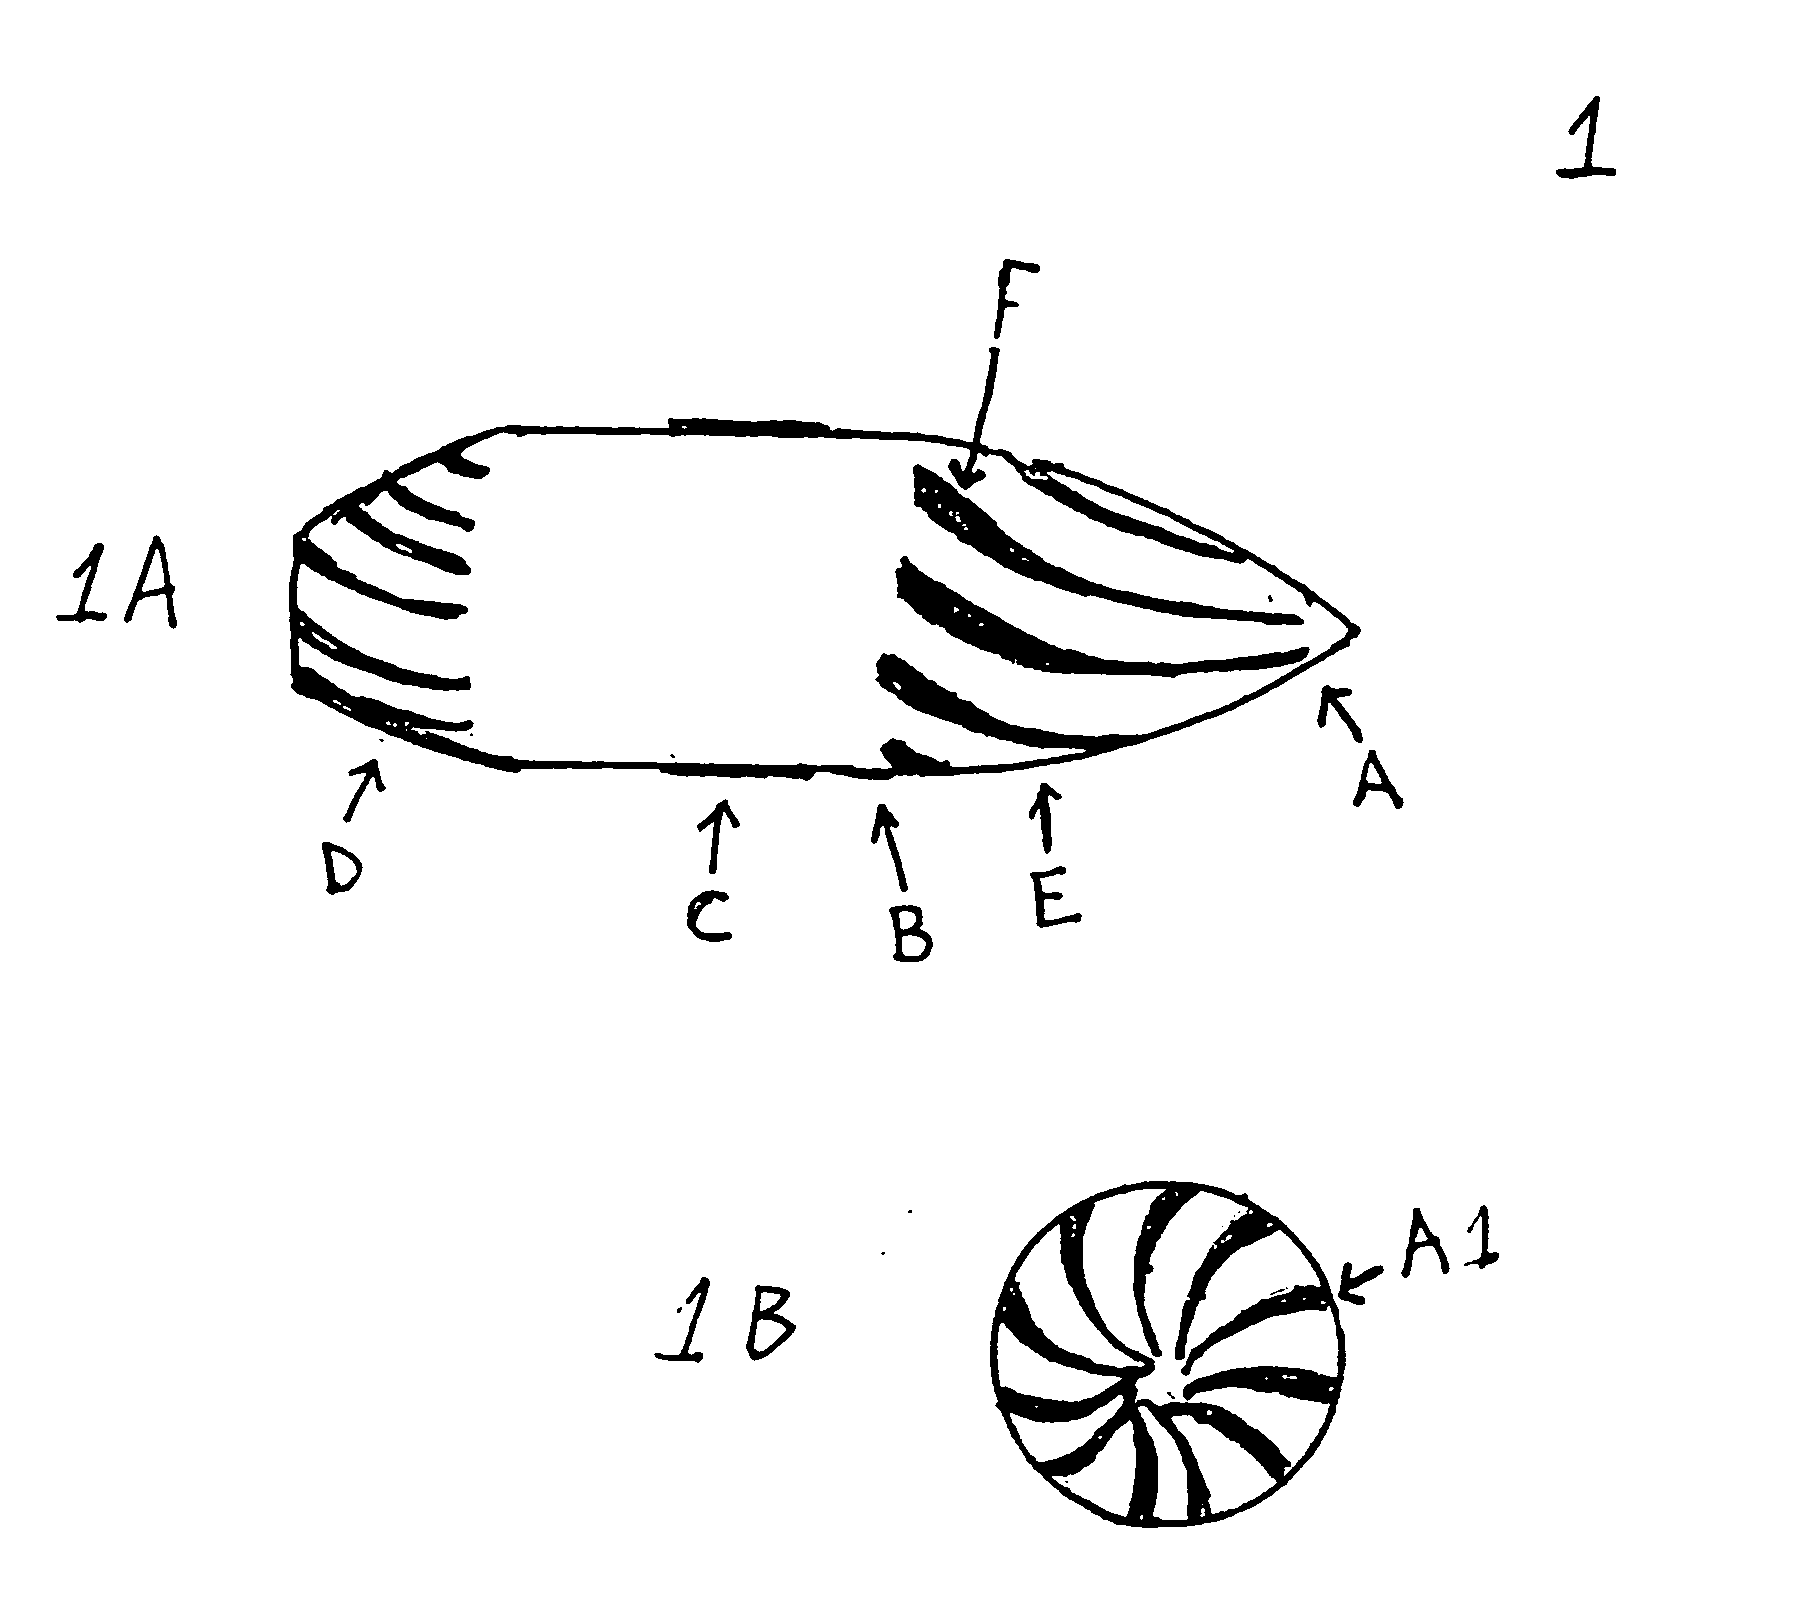 Bullet or Projectile With Spiral Grooves